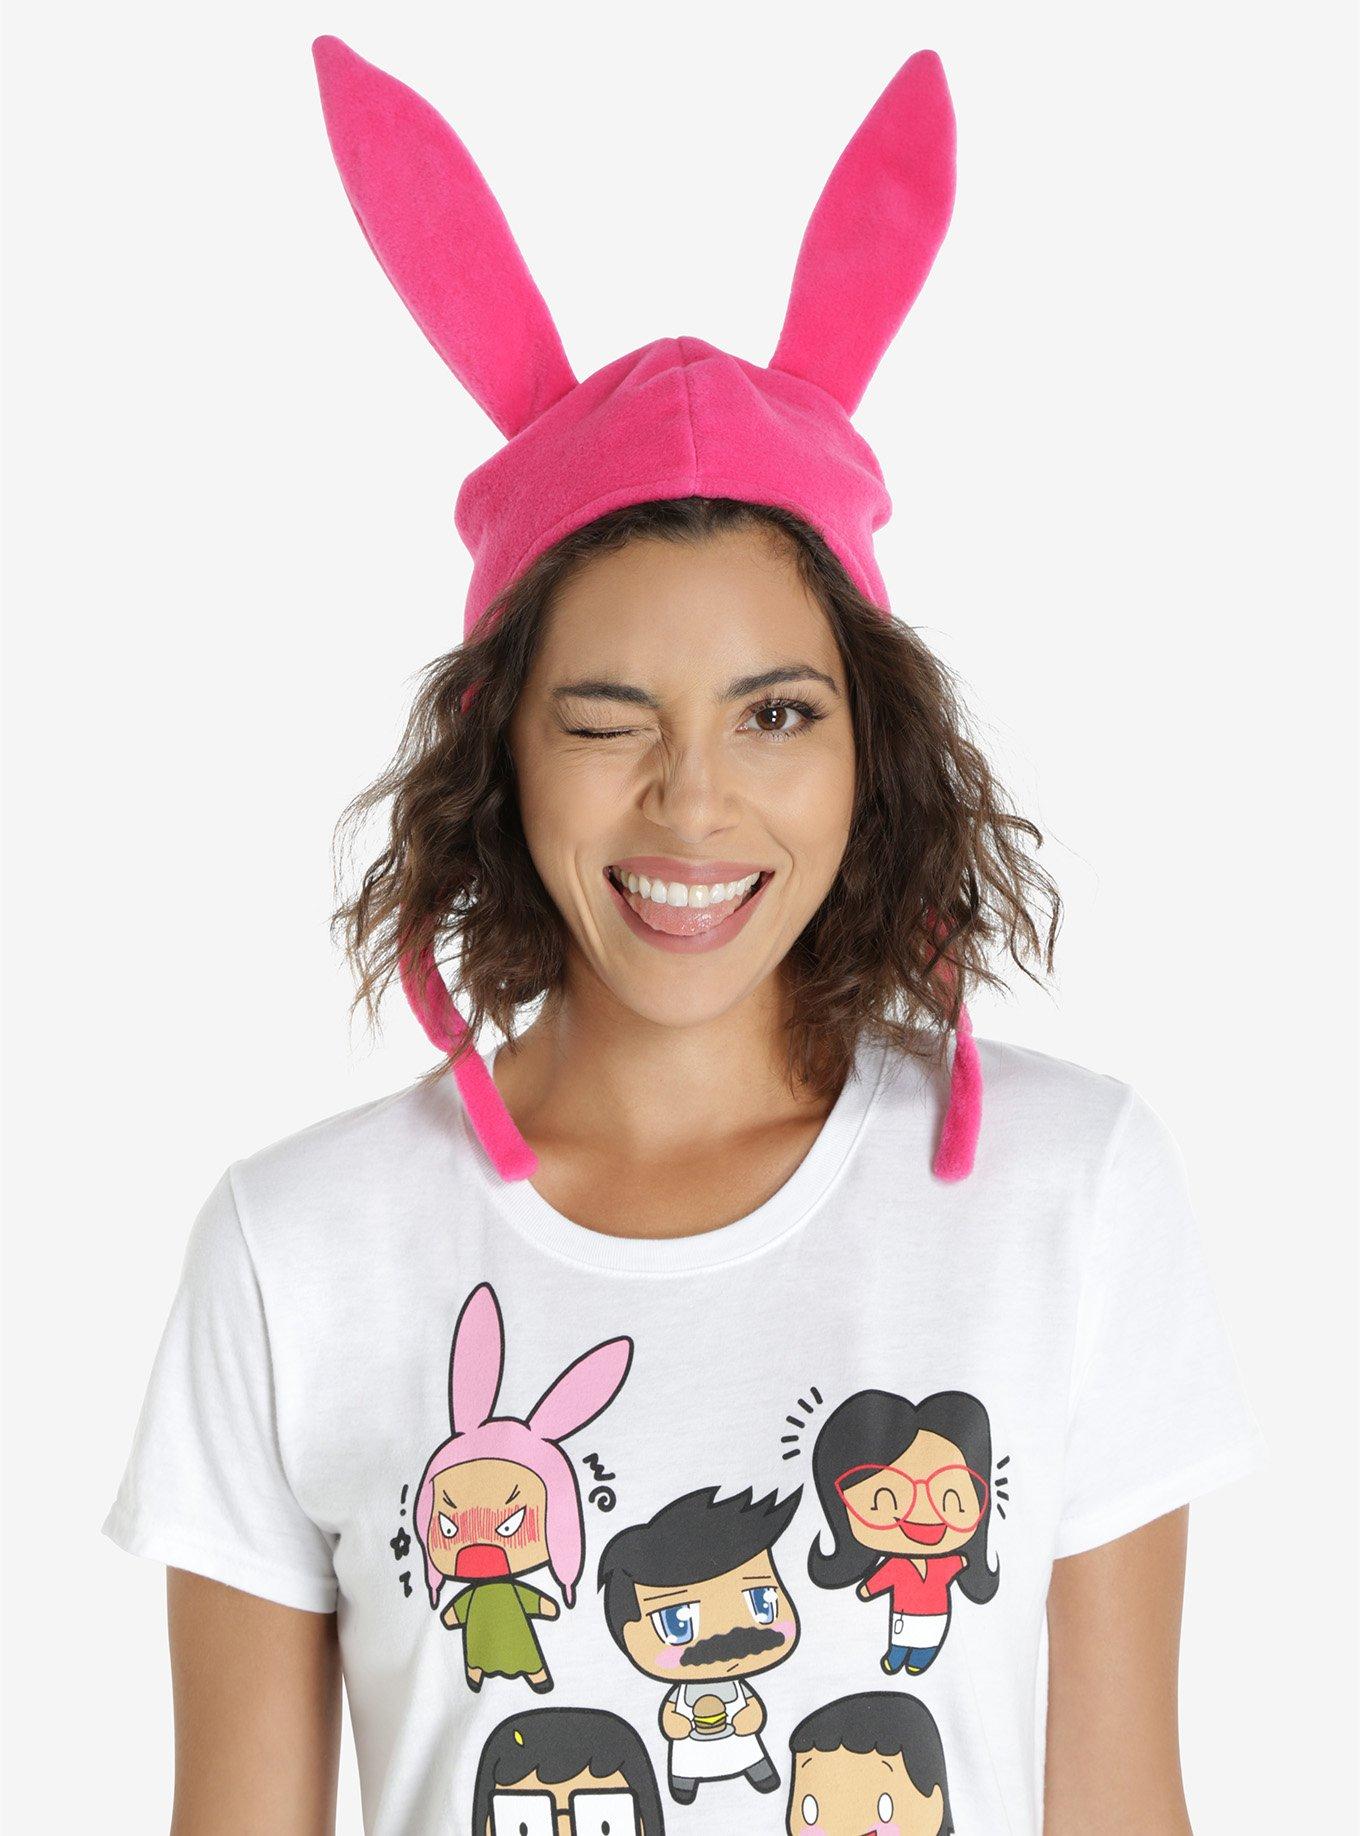 Louise belcher bunny ears from bobs burgers Art Board Print for